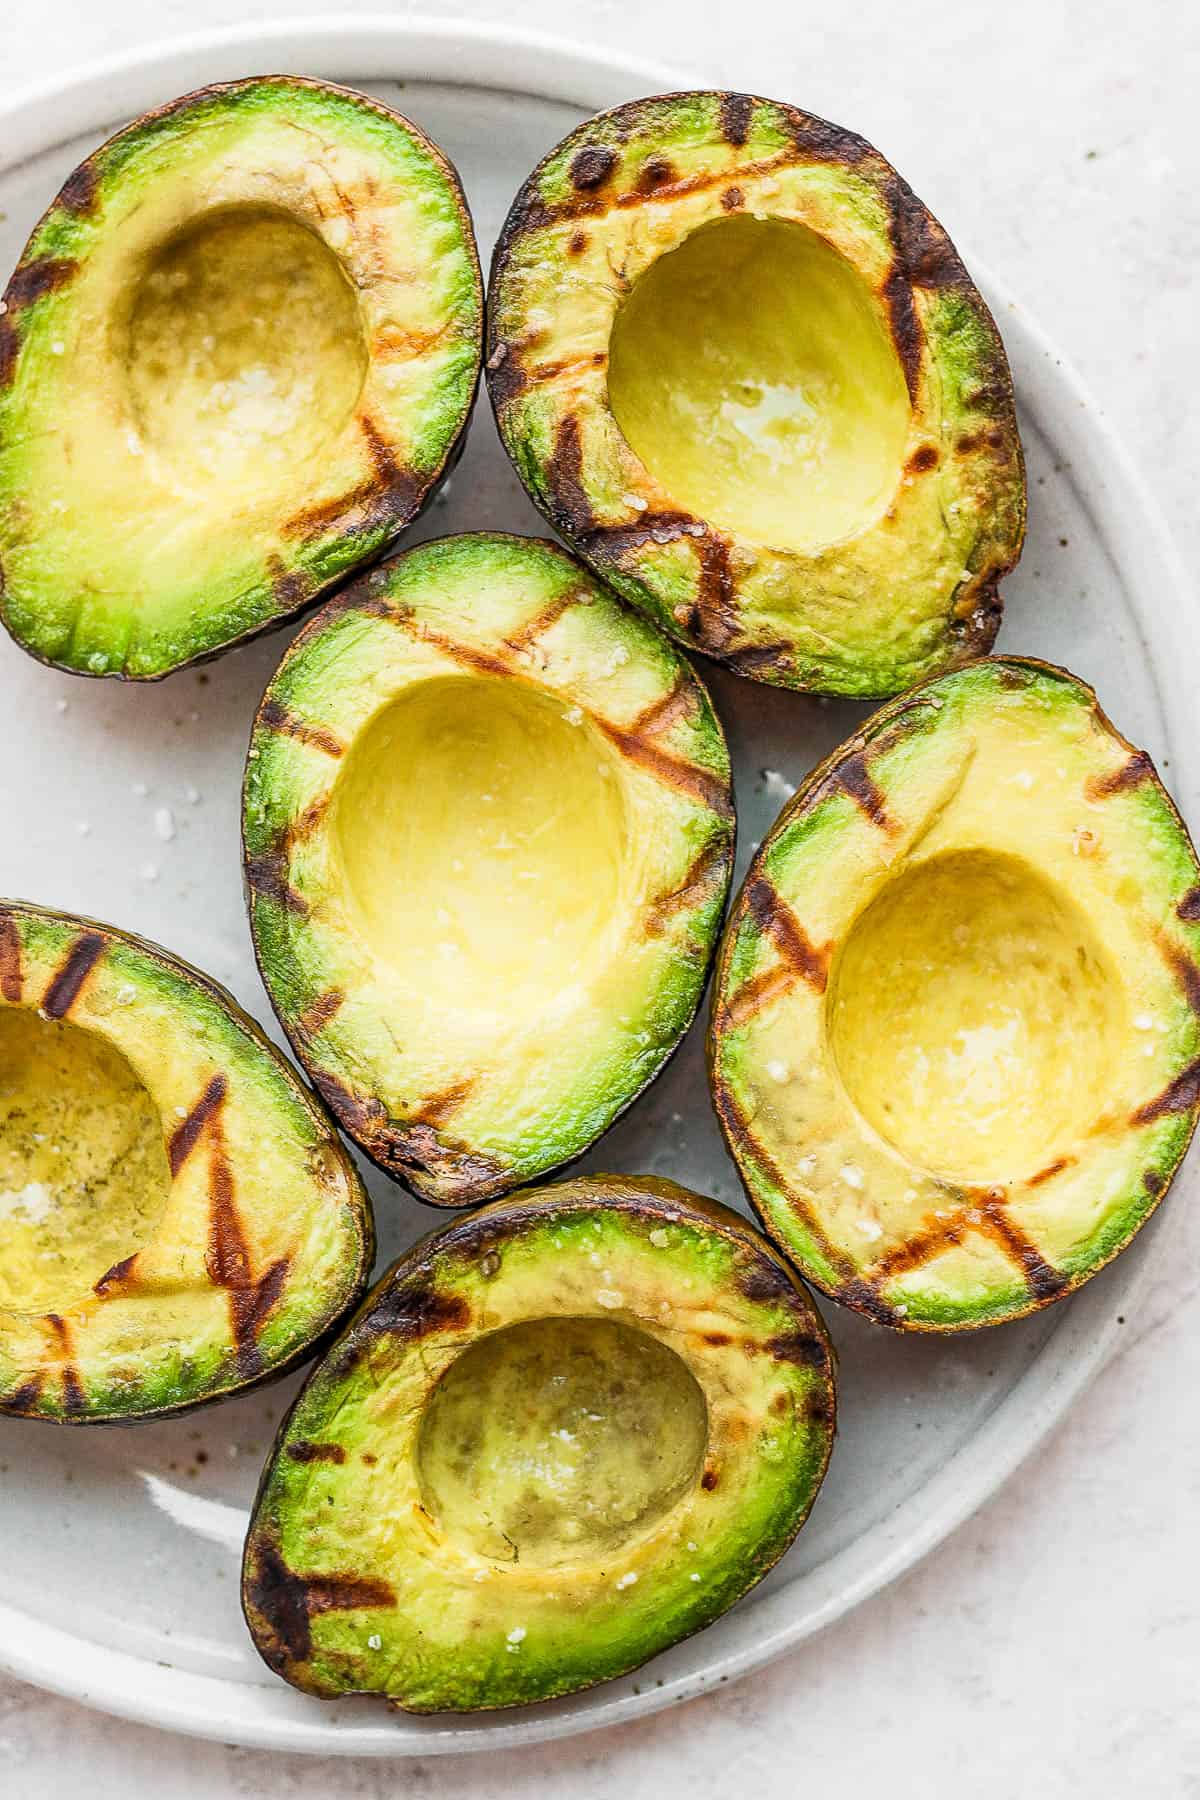 Plate of grilled avocados with grill marks.